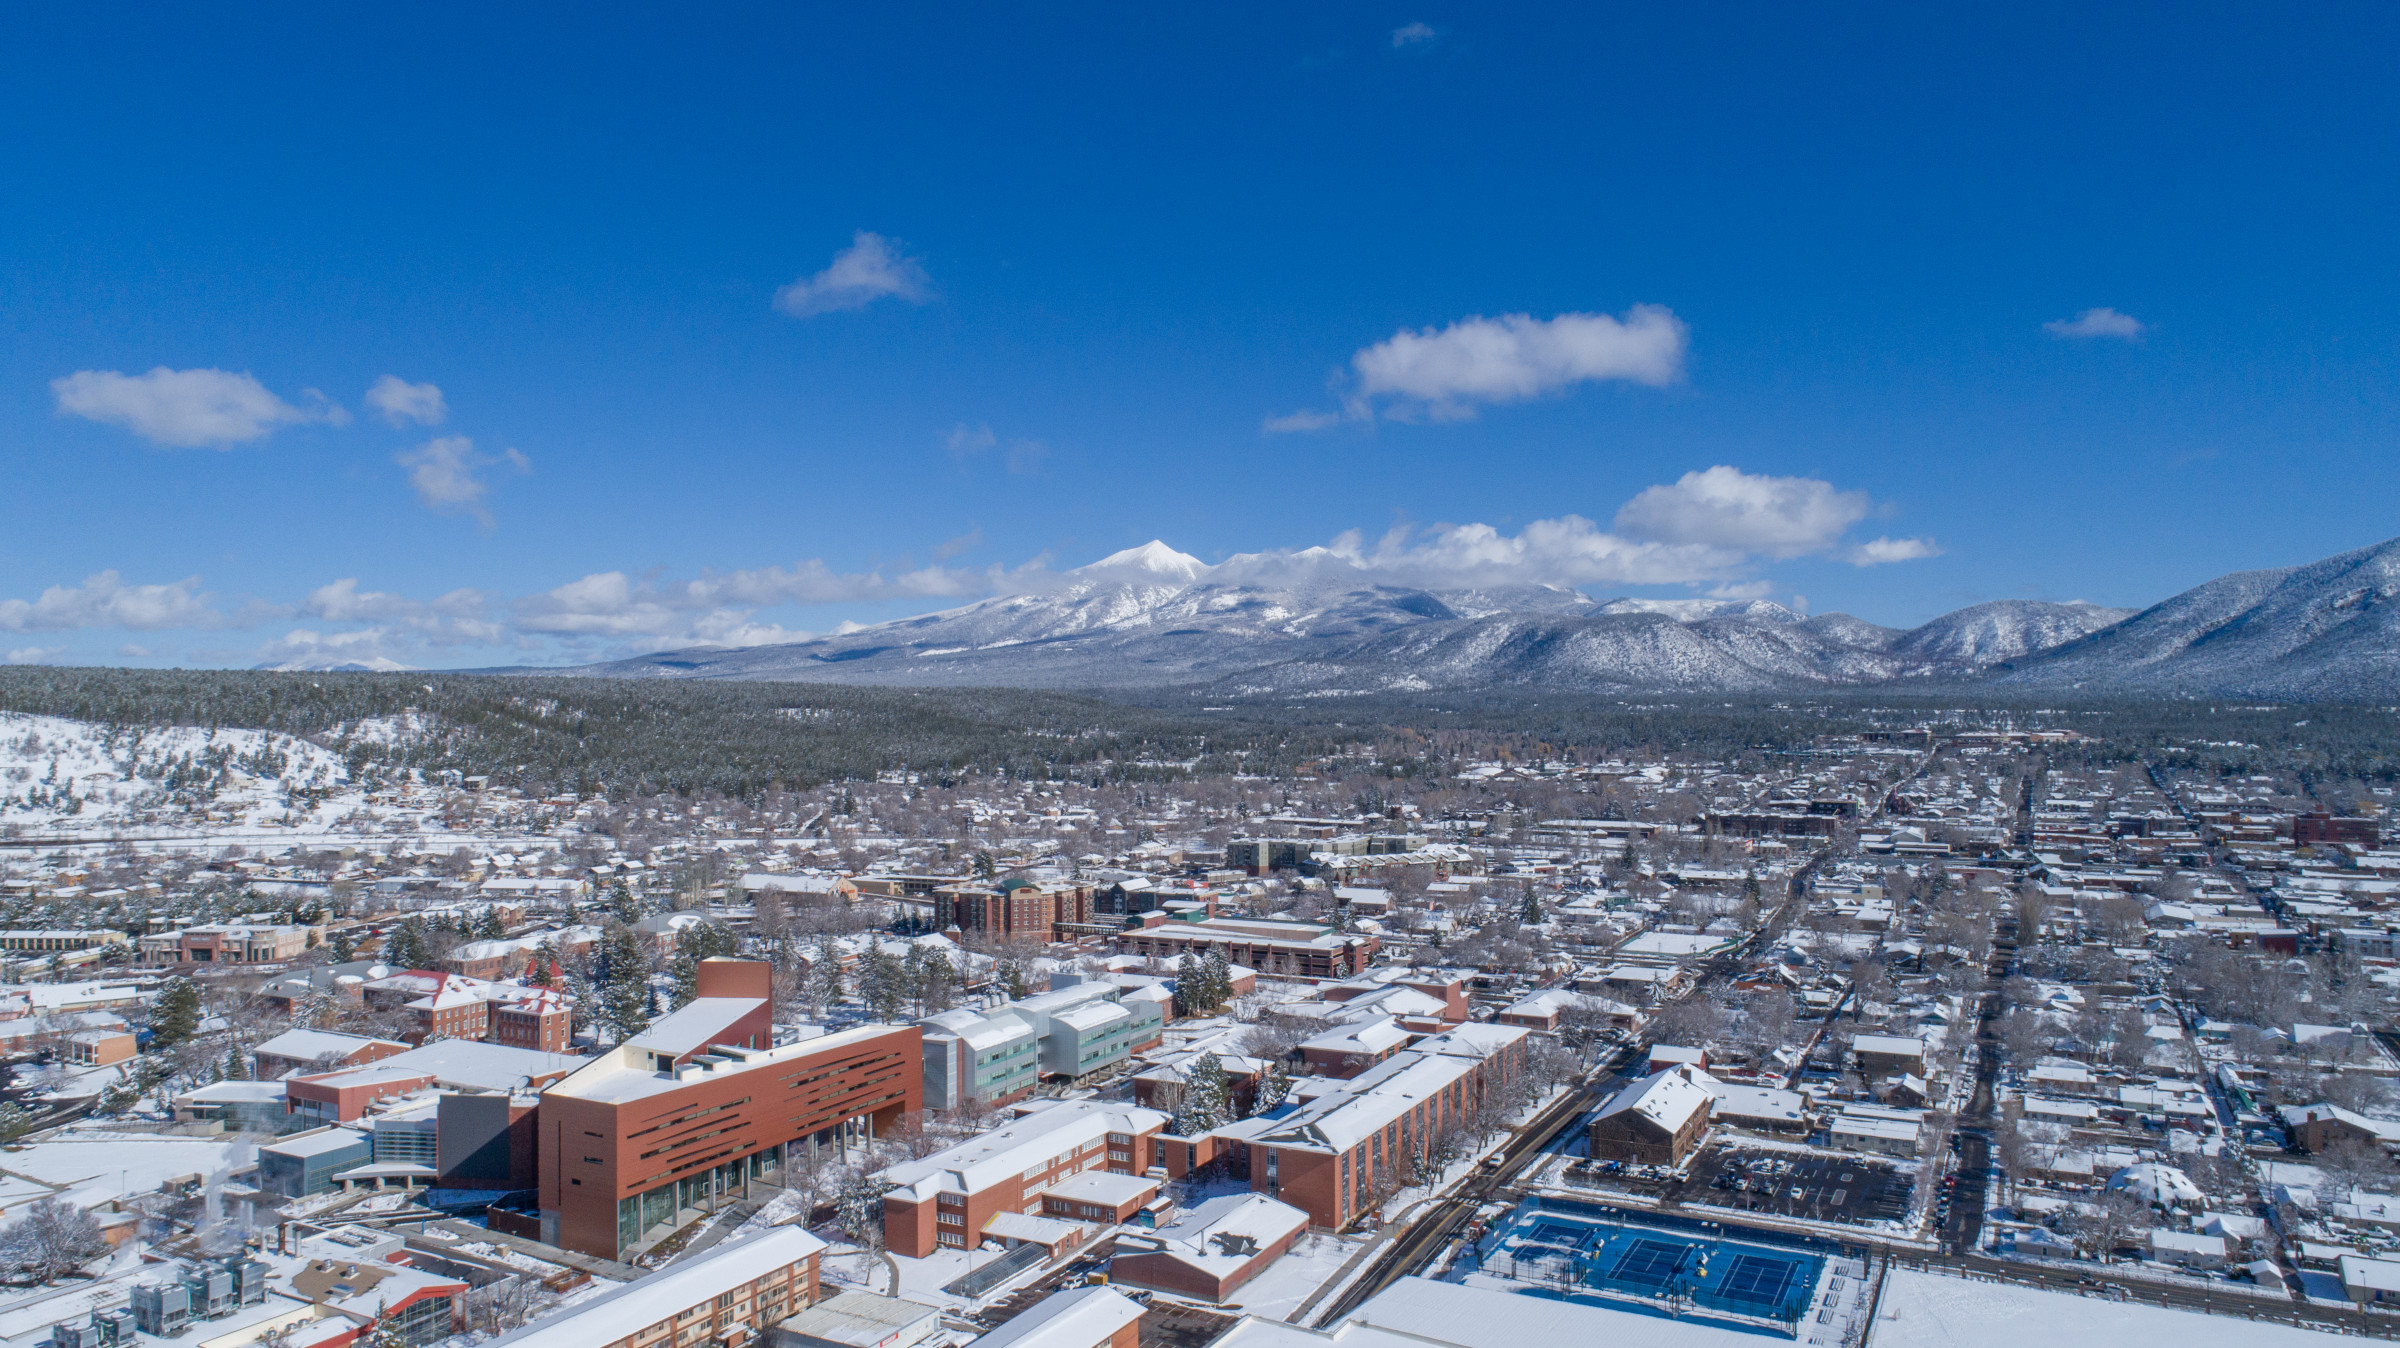 Photo taken by a drone of Flagstaff on a snowy day.